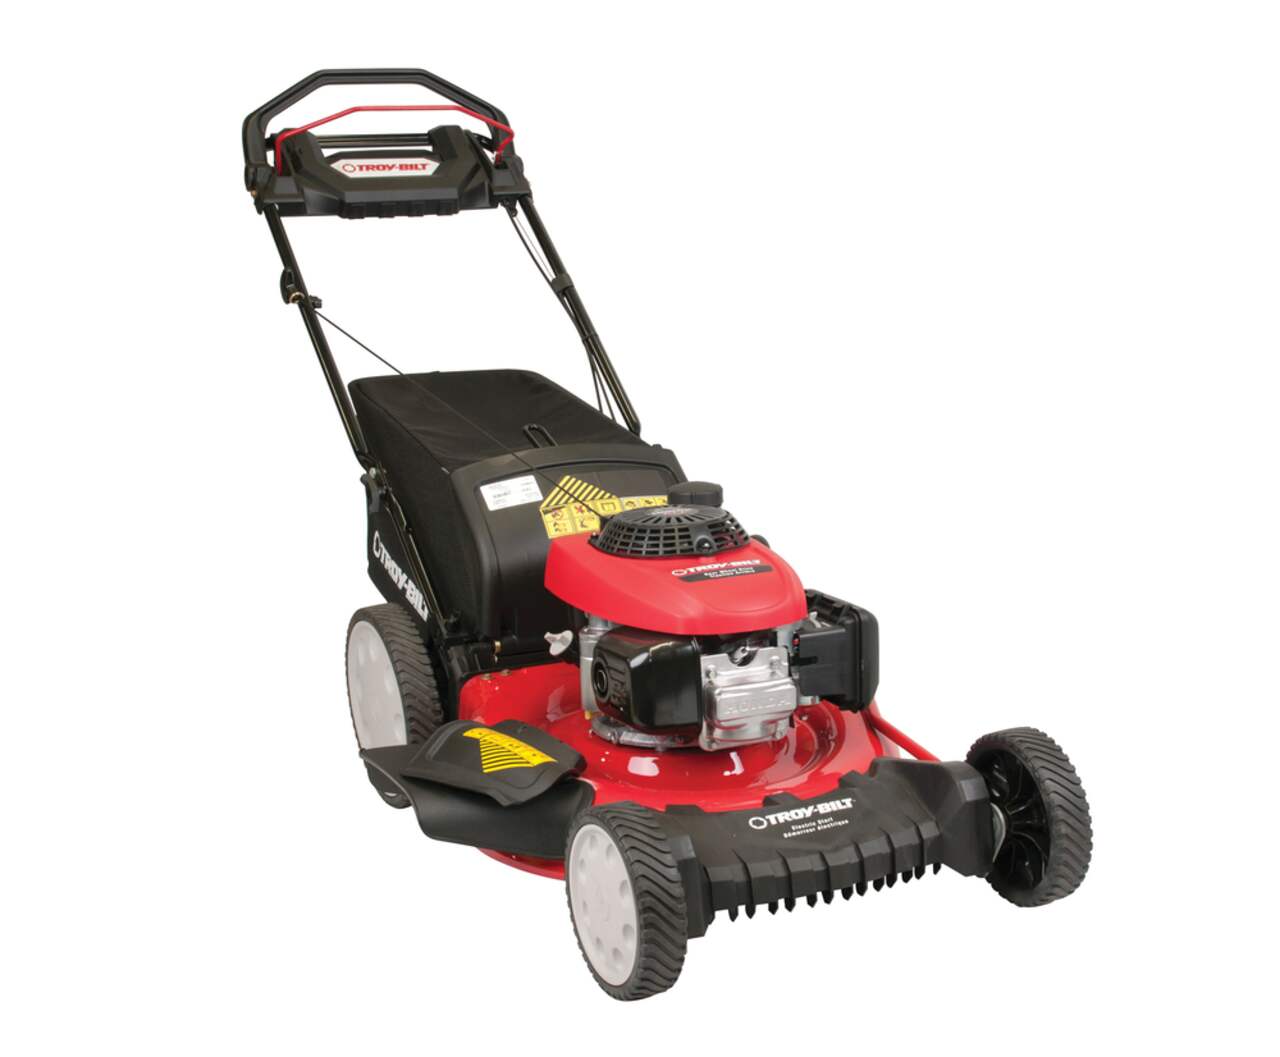 https://media-www.canadiantire.ca/product/seasonal-gardening/outdoor-tools/lawn-mowers-tractors/0601639/troy-bilt-160cc-smart-speed-mower-d179fa48-a7ad-4bcf-a22b-687c3d4a509f.png?imdensity=1&imwidth=1244&impolicy=mZoom